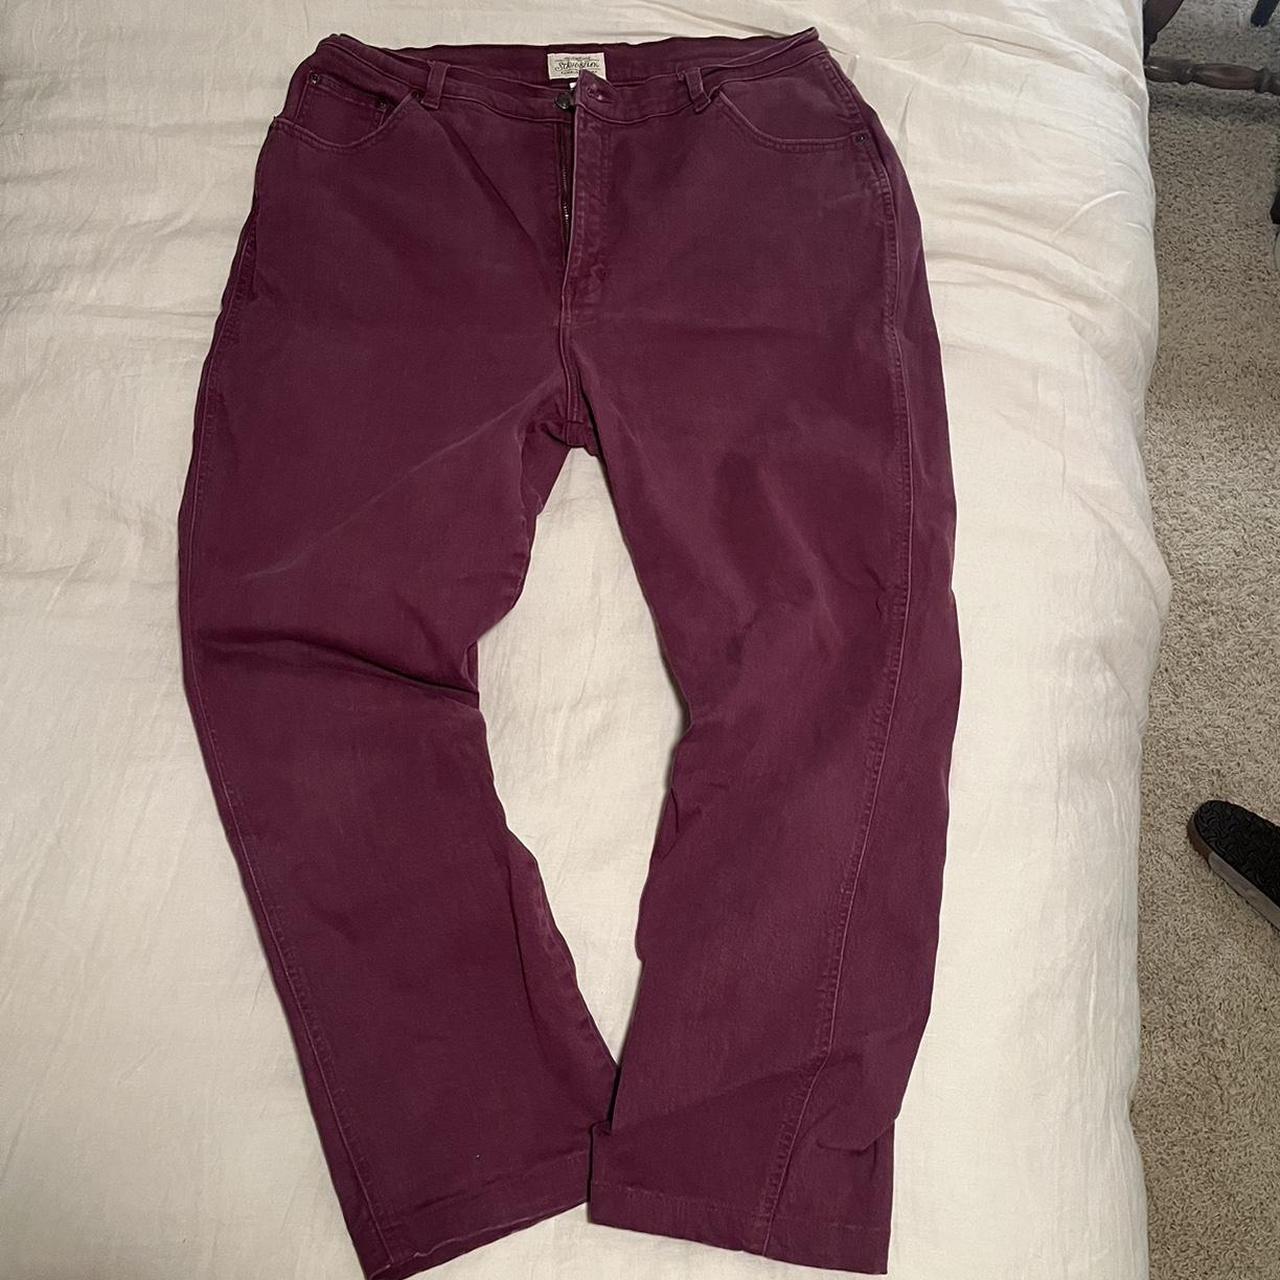 NEW St. Johns Bay Size 16 Skinny Jeans Red/Maroon - Depop